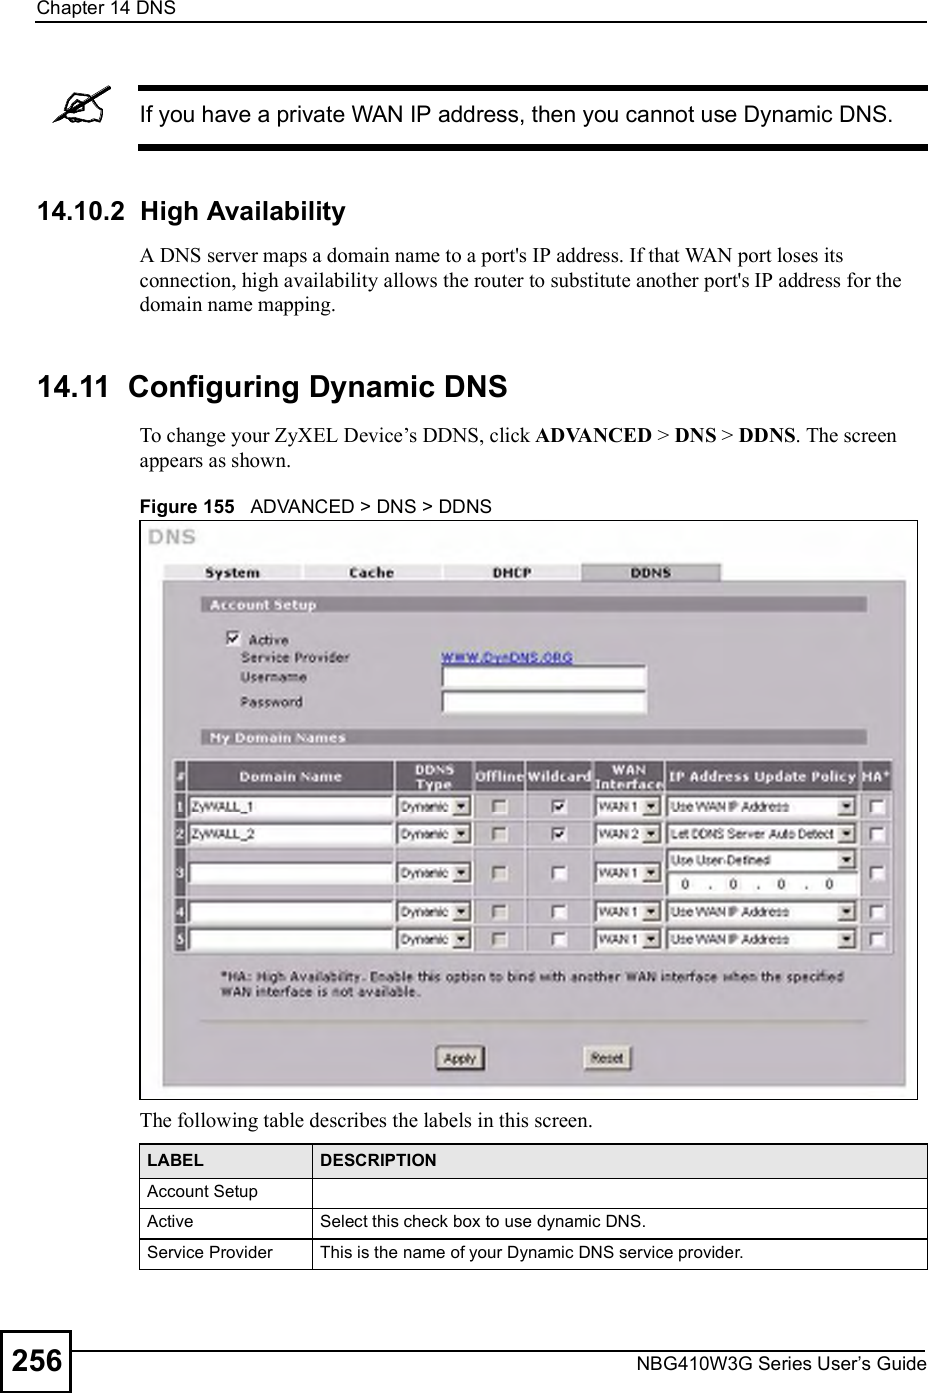 Chapter 14DNSNBG410W3G Series User s Guide256If you have a private WAN IP address, then you cannot use Dynamic DNS.14.10.2  High AvailabilityA DNS server maps a domain name to a port&apos;s IP address. If that WAN port loses its connection, high availability allows the router to substitute another port&apos;s IP address for the domain name mapping.14.11  Configuring Dynamic DNSTo change your ZyXEL Device!s DDNS, click ADVANCED &gt; DNS &gt; DDNS. The screen appears as shown. Figure 155   ADVANCED &gt; DNS &gt; DDNSThe following table describes the labels in this screen.LABEL DESCRIPTIONAccount SetupActiveSelect this check box to use dynamic DNS.Service ProviderThis is the name of your Dynamic DNS service provider.